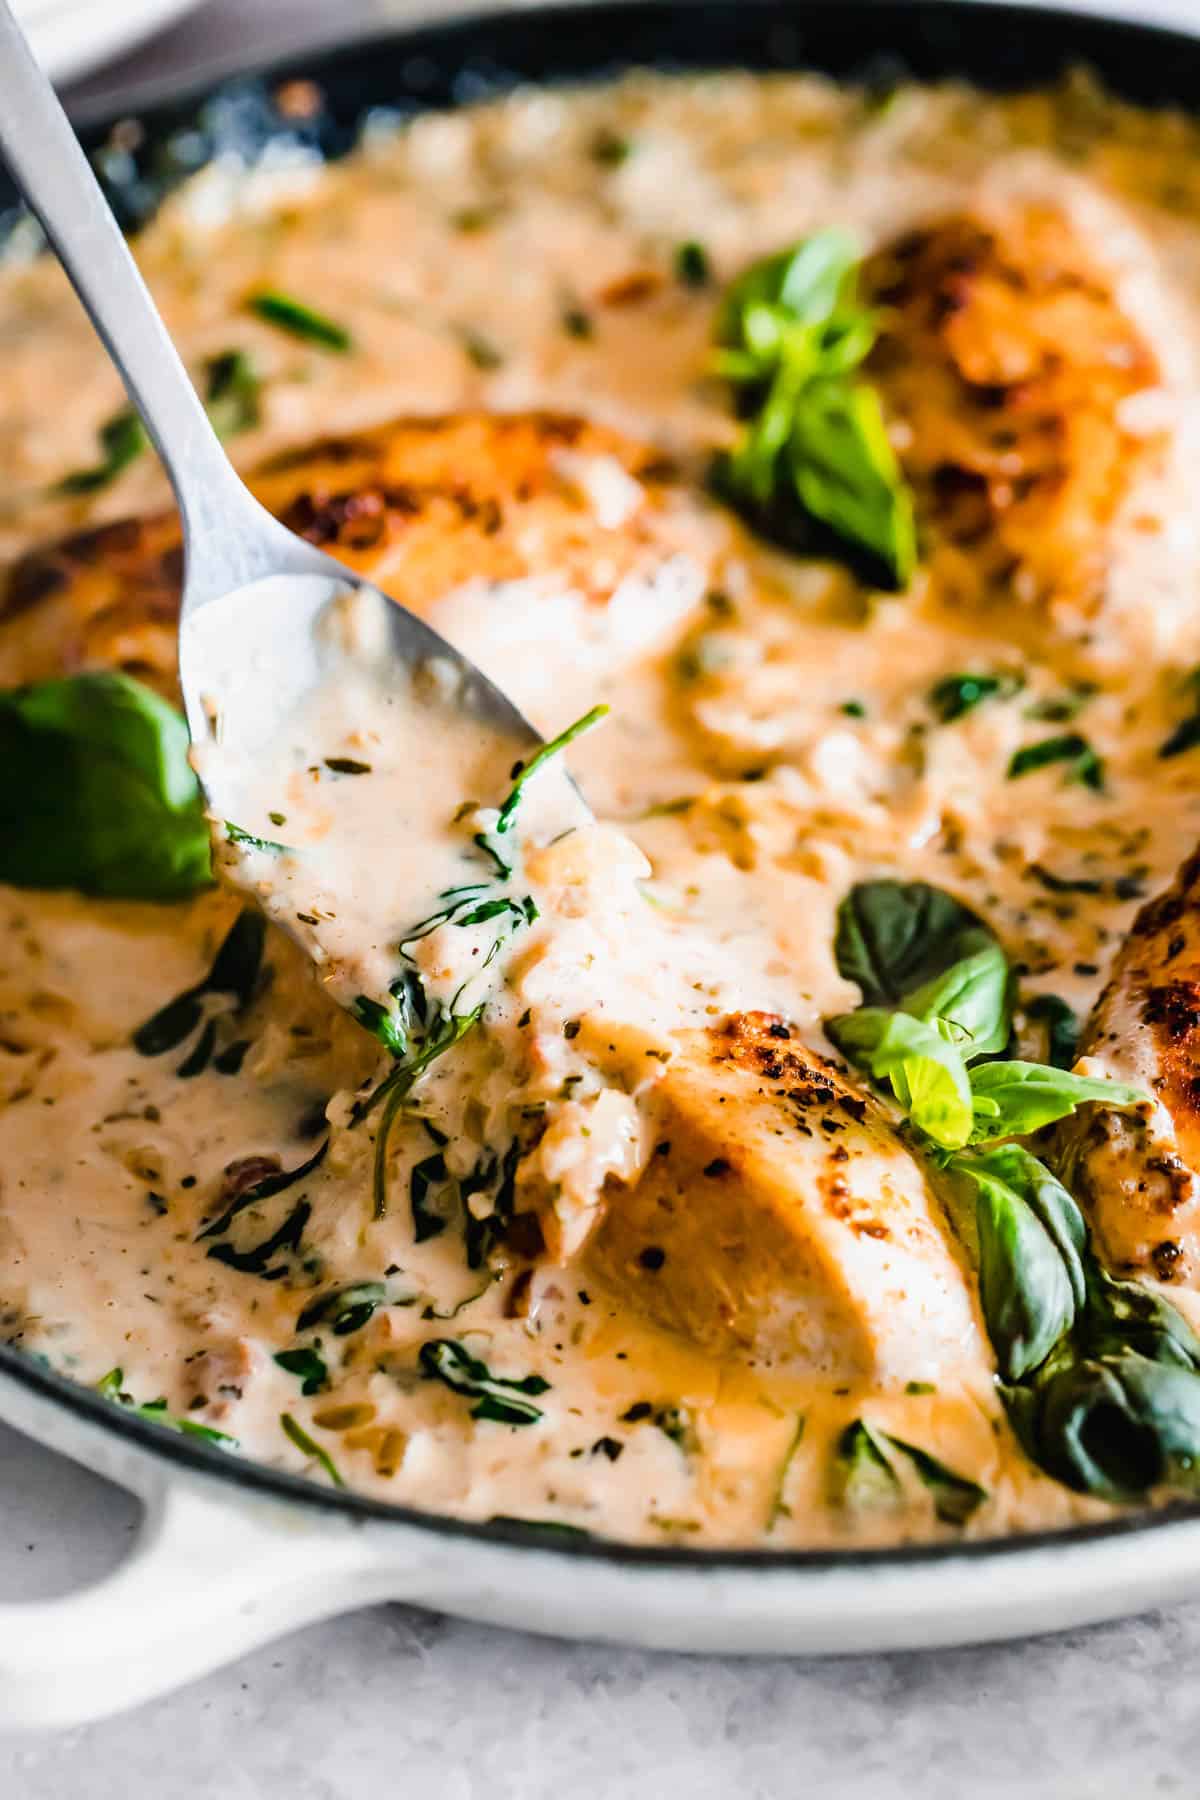 Sautéed chicken breasts in a creamy sauce garnished with basil in a skillet, with a serving spoon.